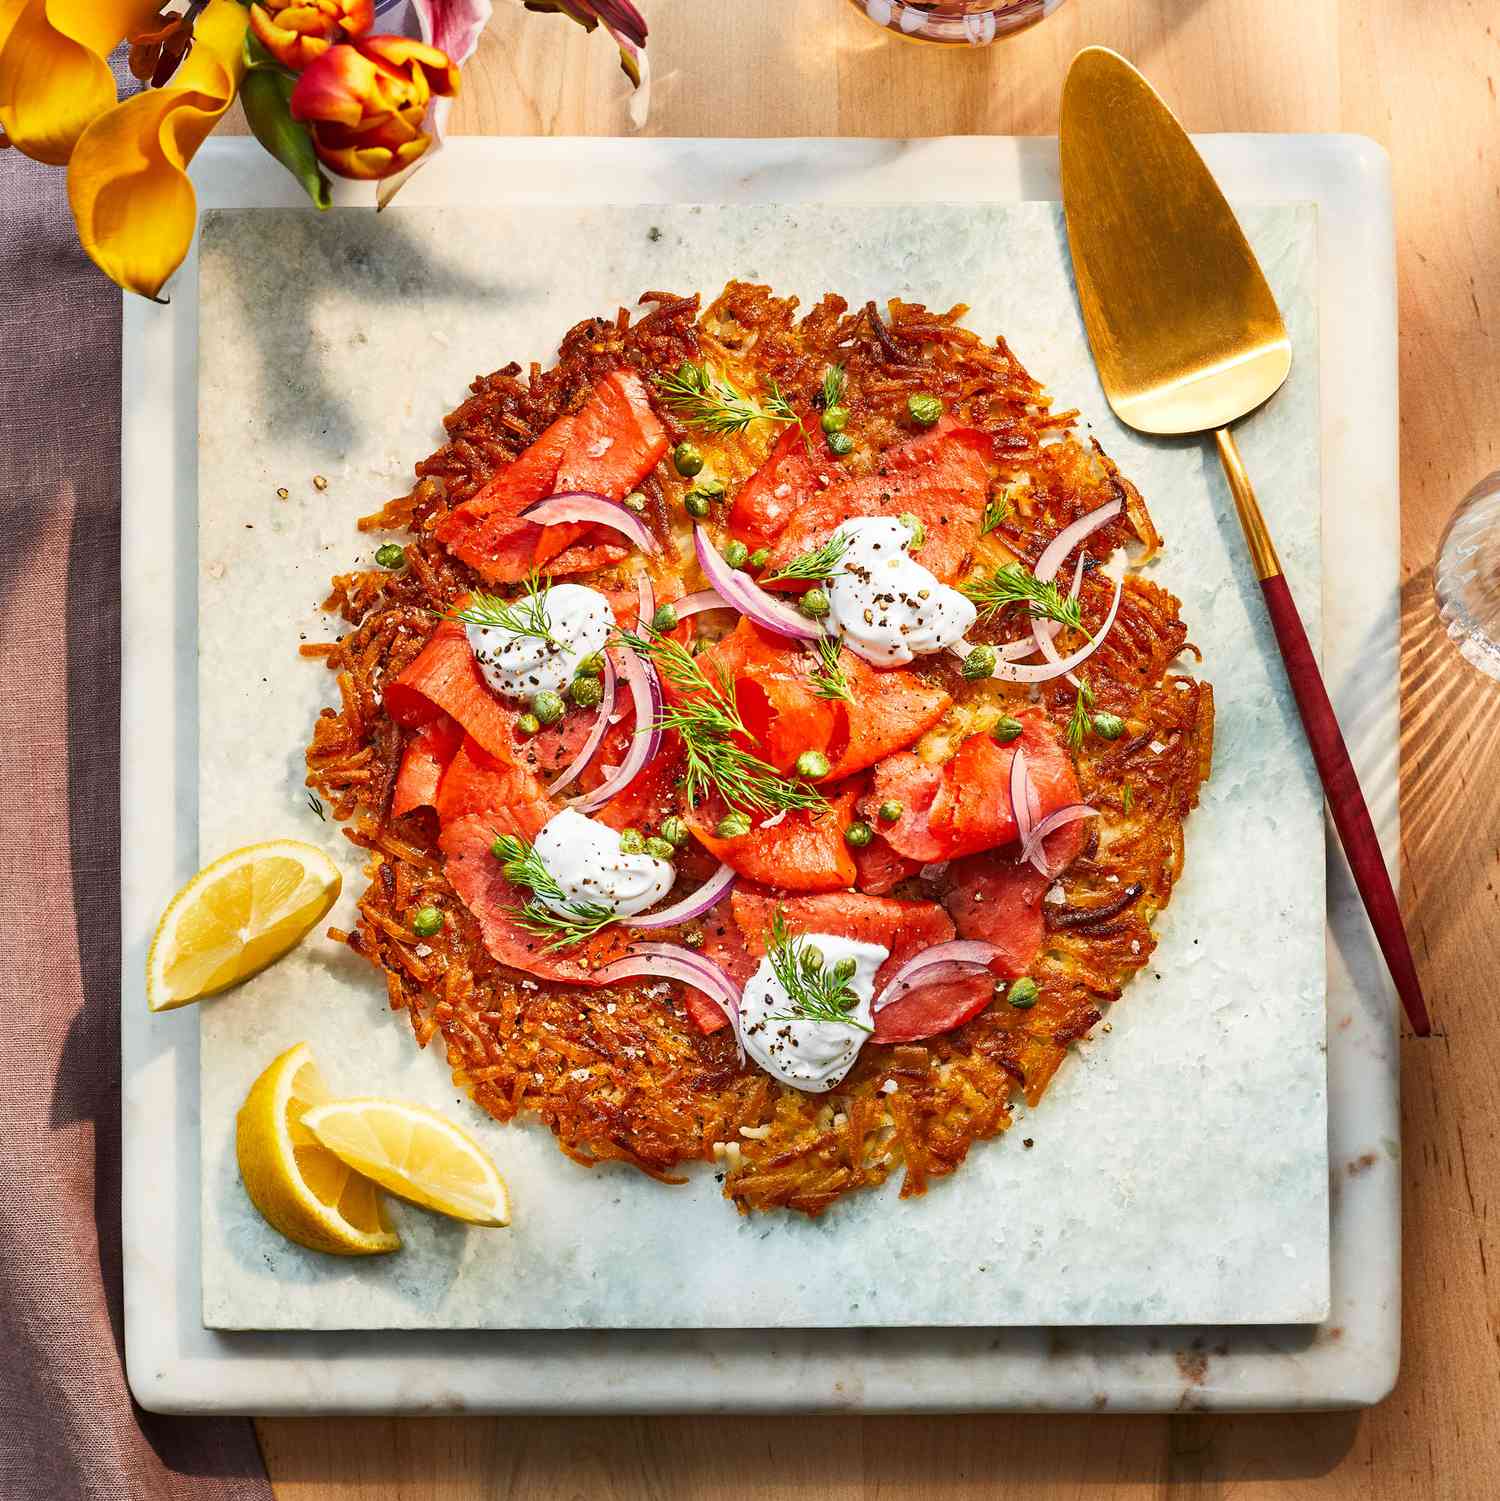 Skillet Hash Browns with Smoked Salmon